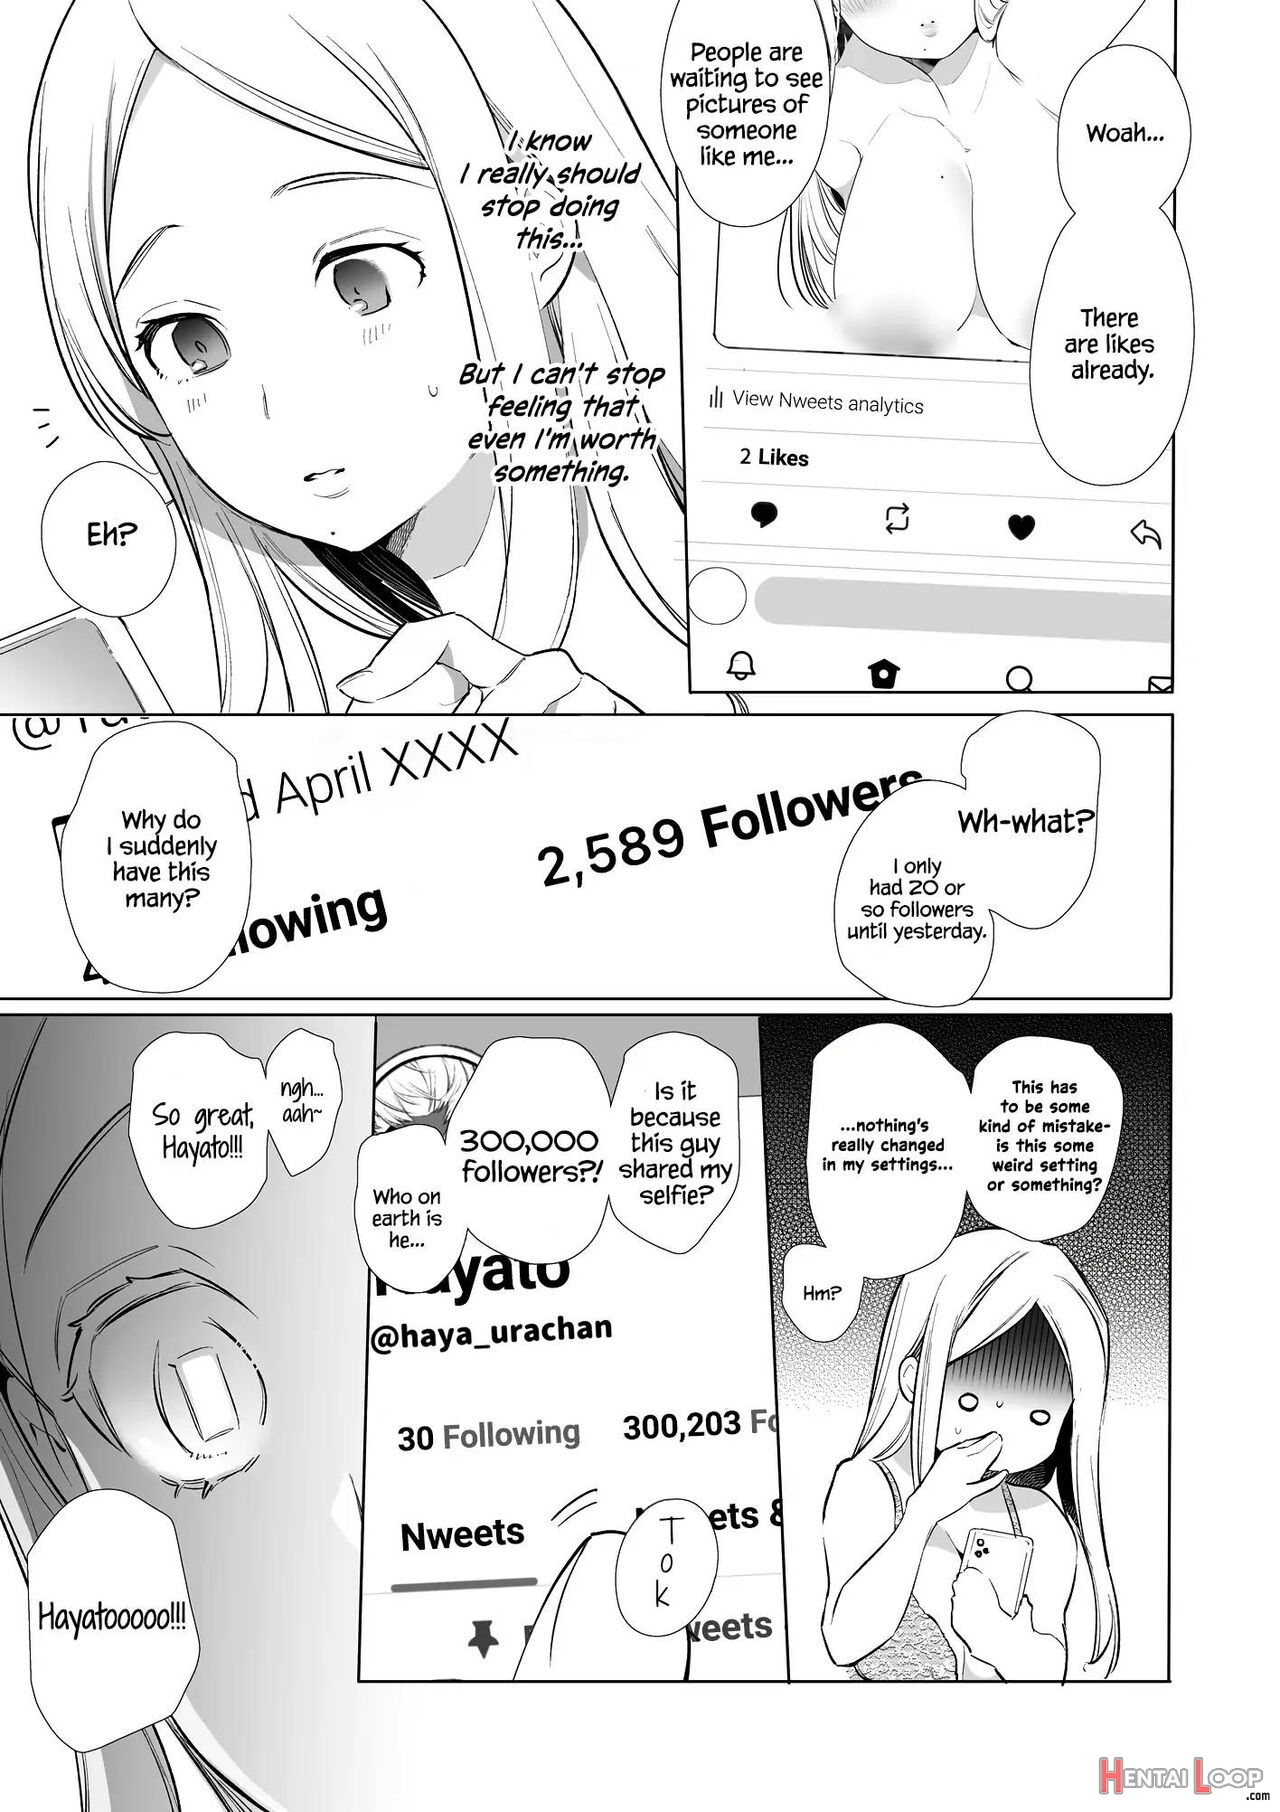 Kana-san Ntr ~ Degradation Of A Housewife By A Guy In An Alter Account ~ page 8